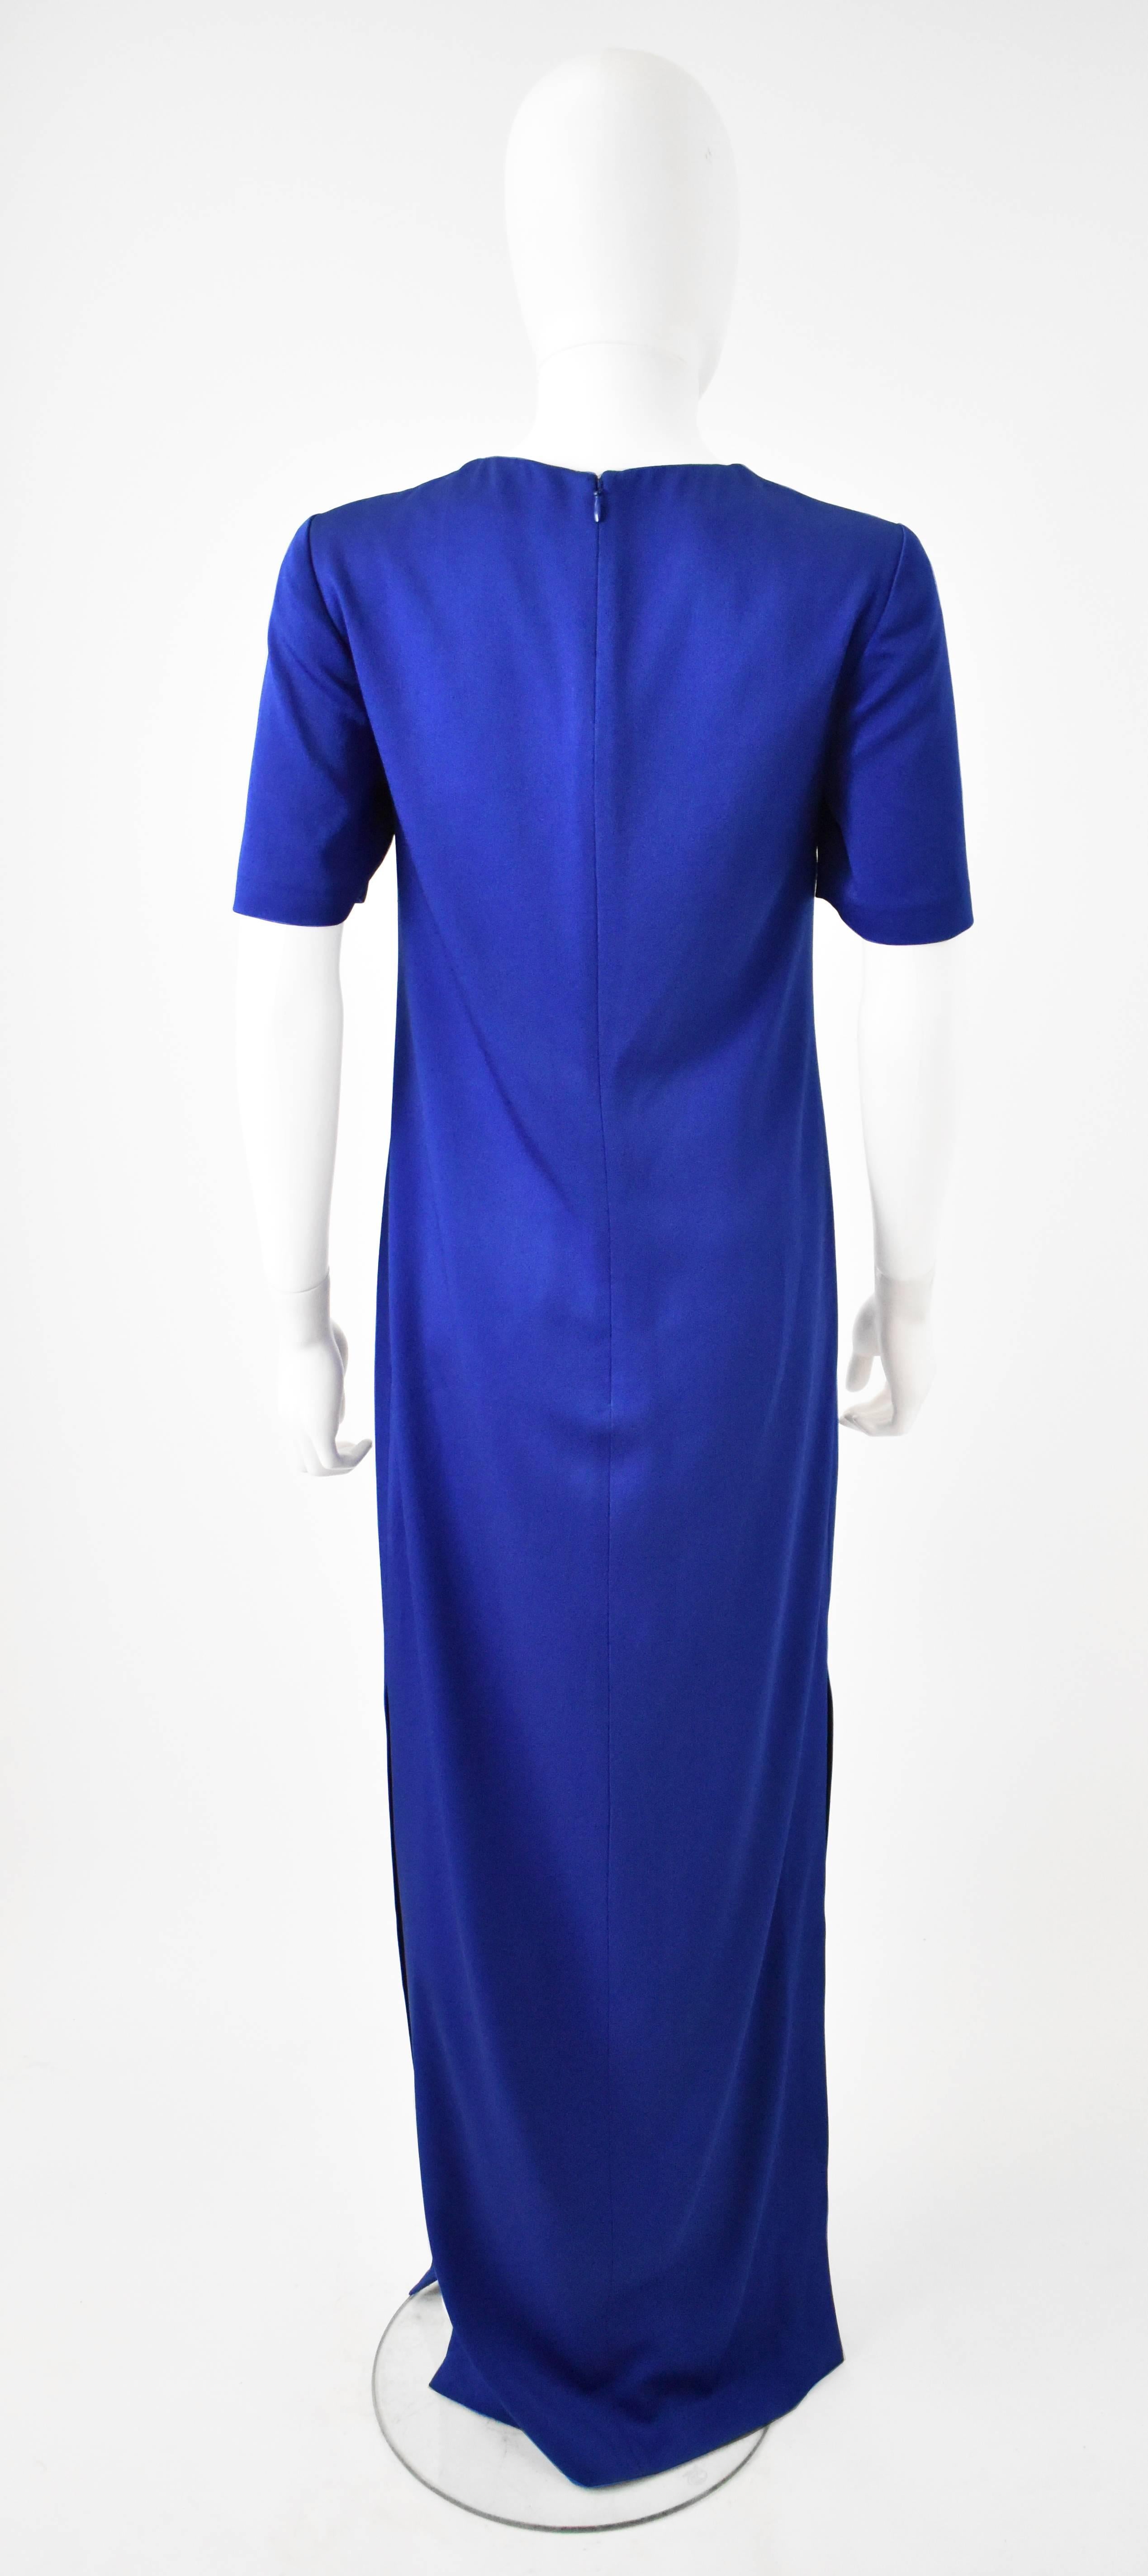 Alexander McQueen Royal Blue Long Dress with Dramatic Leg Slits  In Excellent Condition For Sale In London, GB